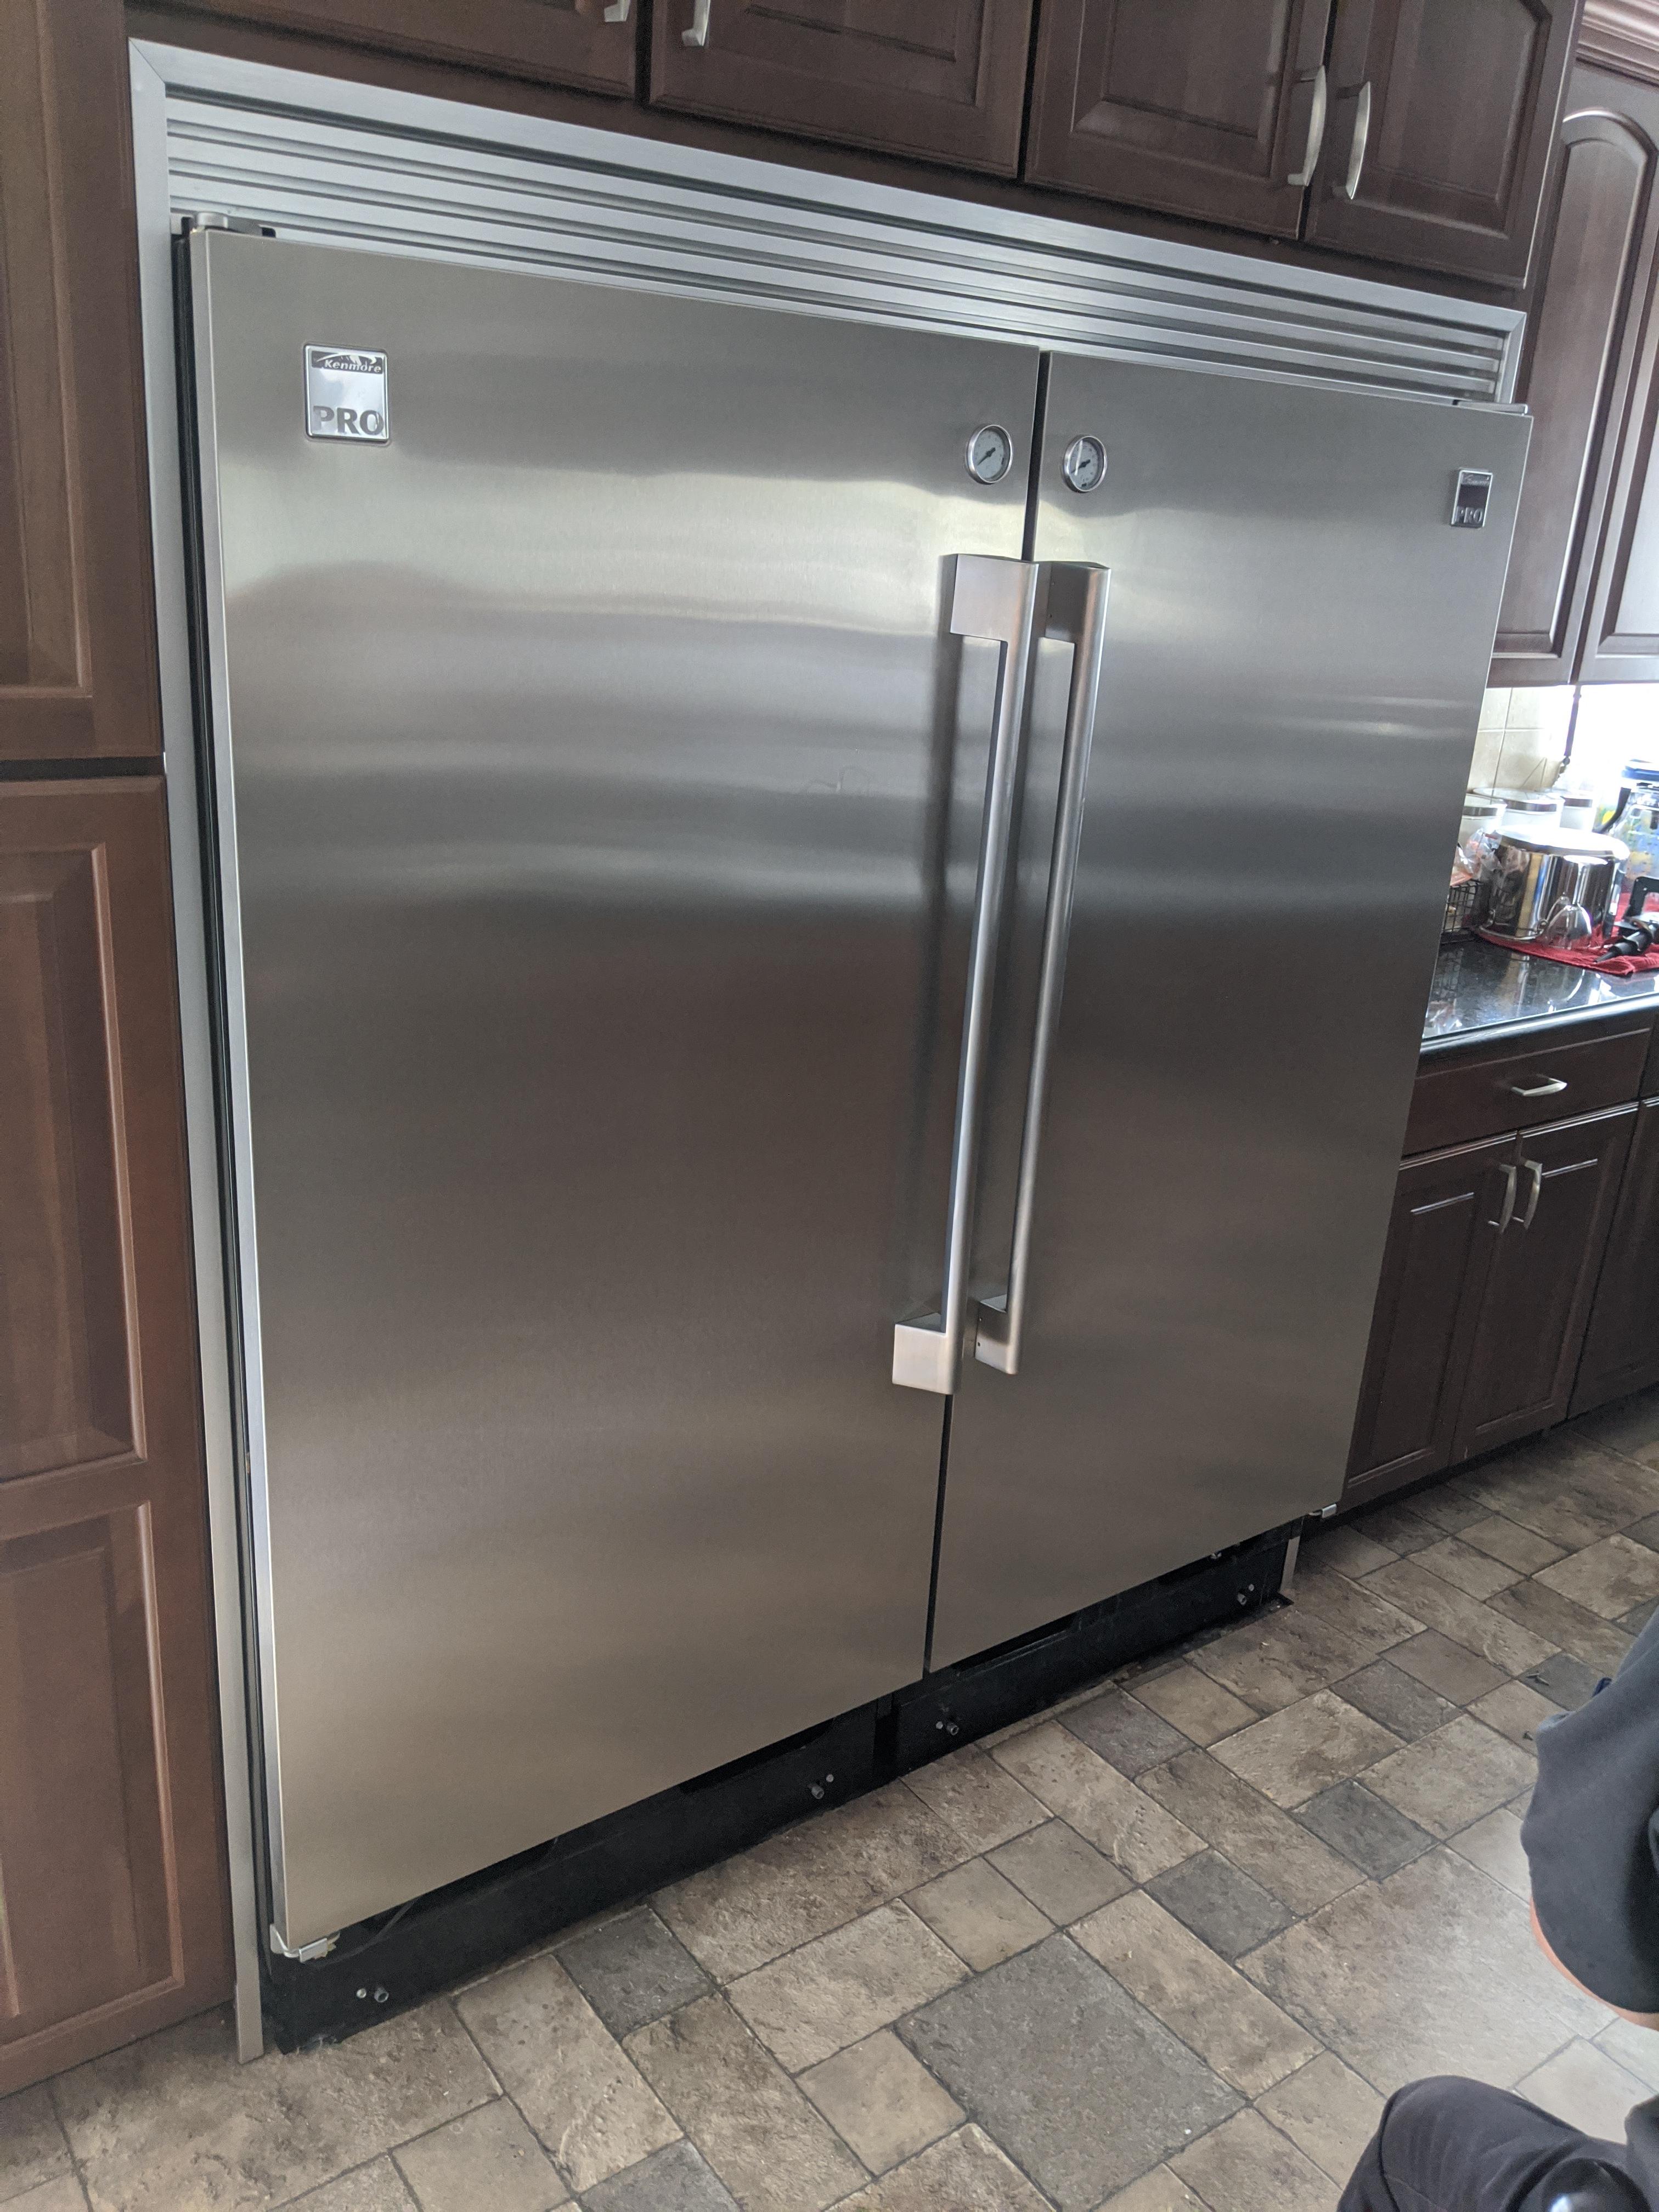 Kenmore Pro / Frigidaire Built-In Freezer and Refrigerator - Appliance